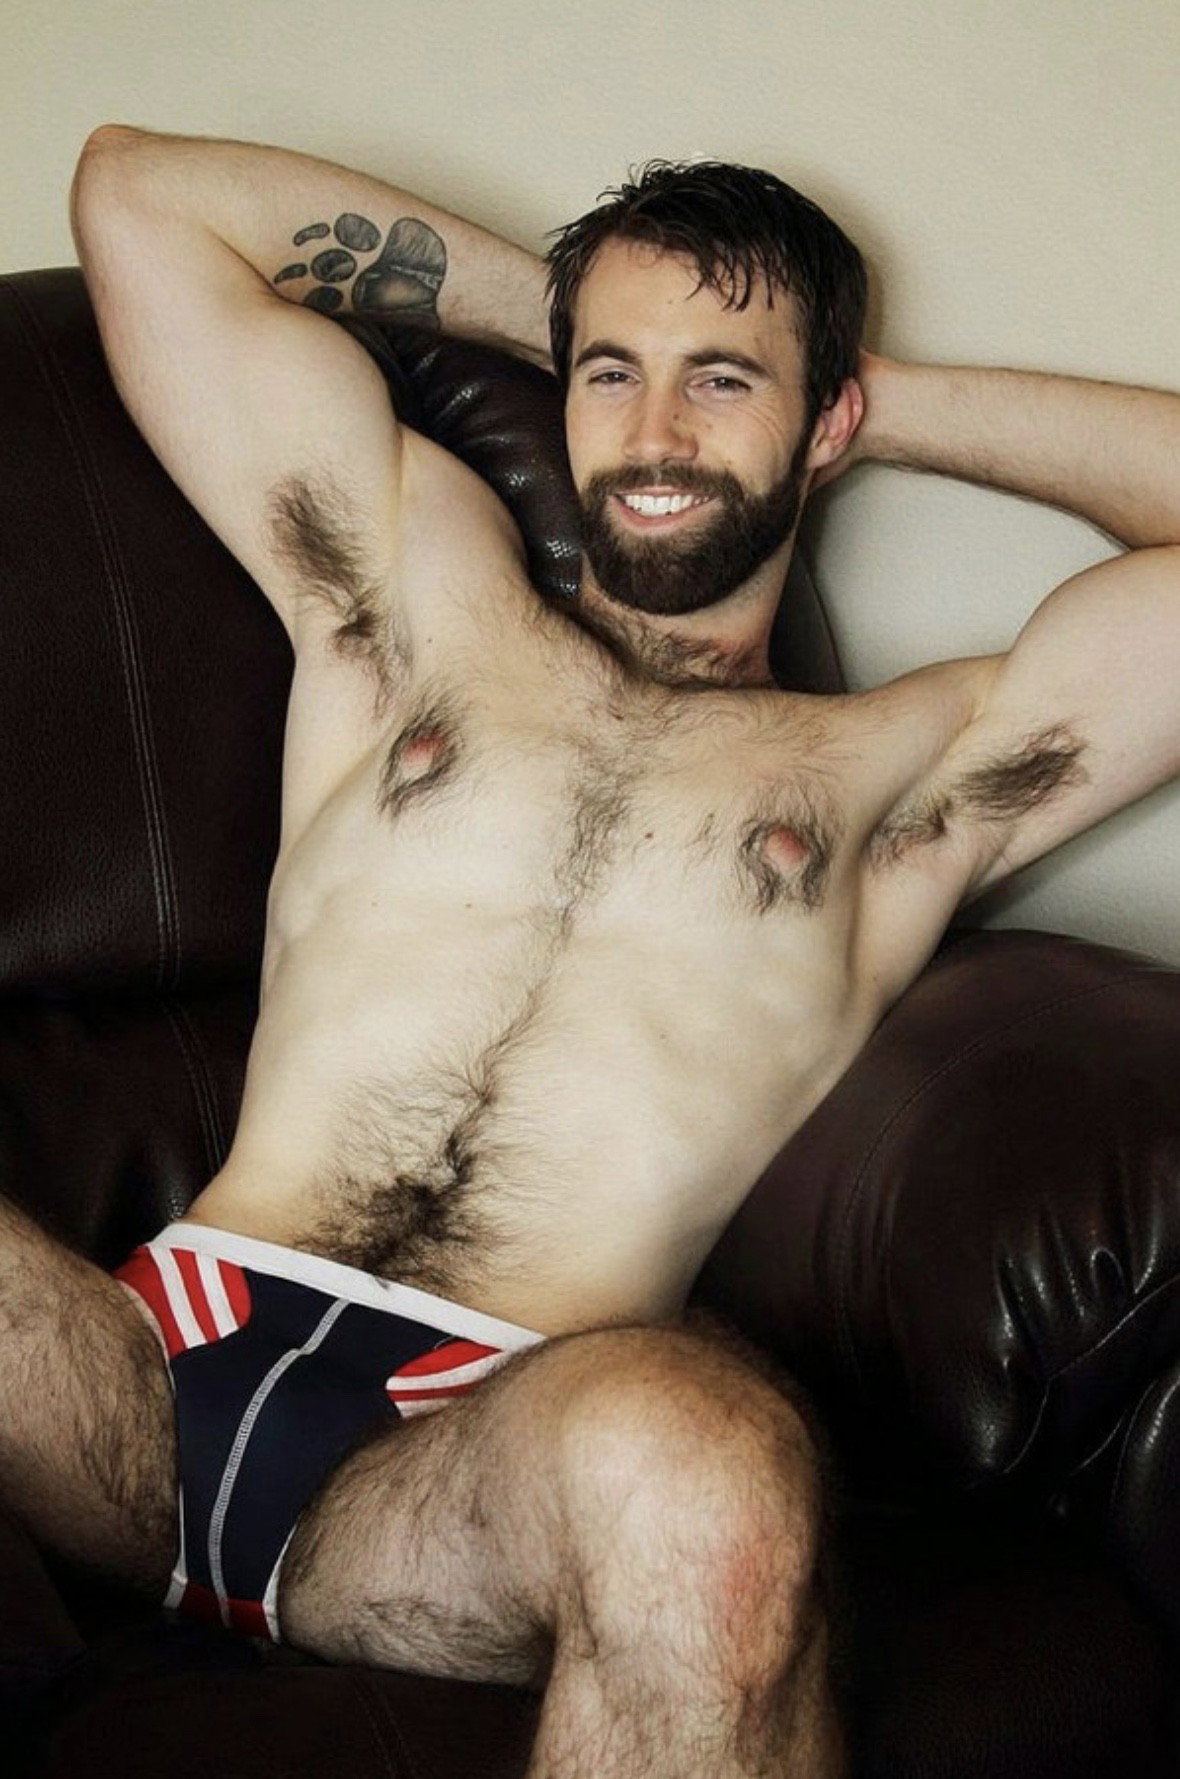 Photo by LeFoutre with the username @LeFoutre,  December 14, 2018 at 5:57 AM. The post is about the topic GayTumblr and the text says 'Sometimes nudity isn’t necessary.  Hairy, handsome, great smile'